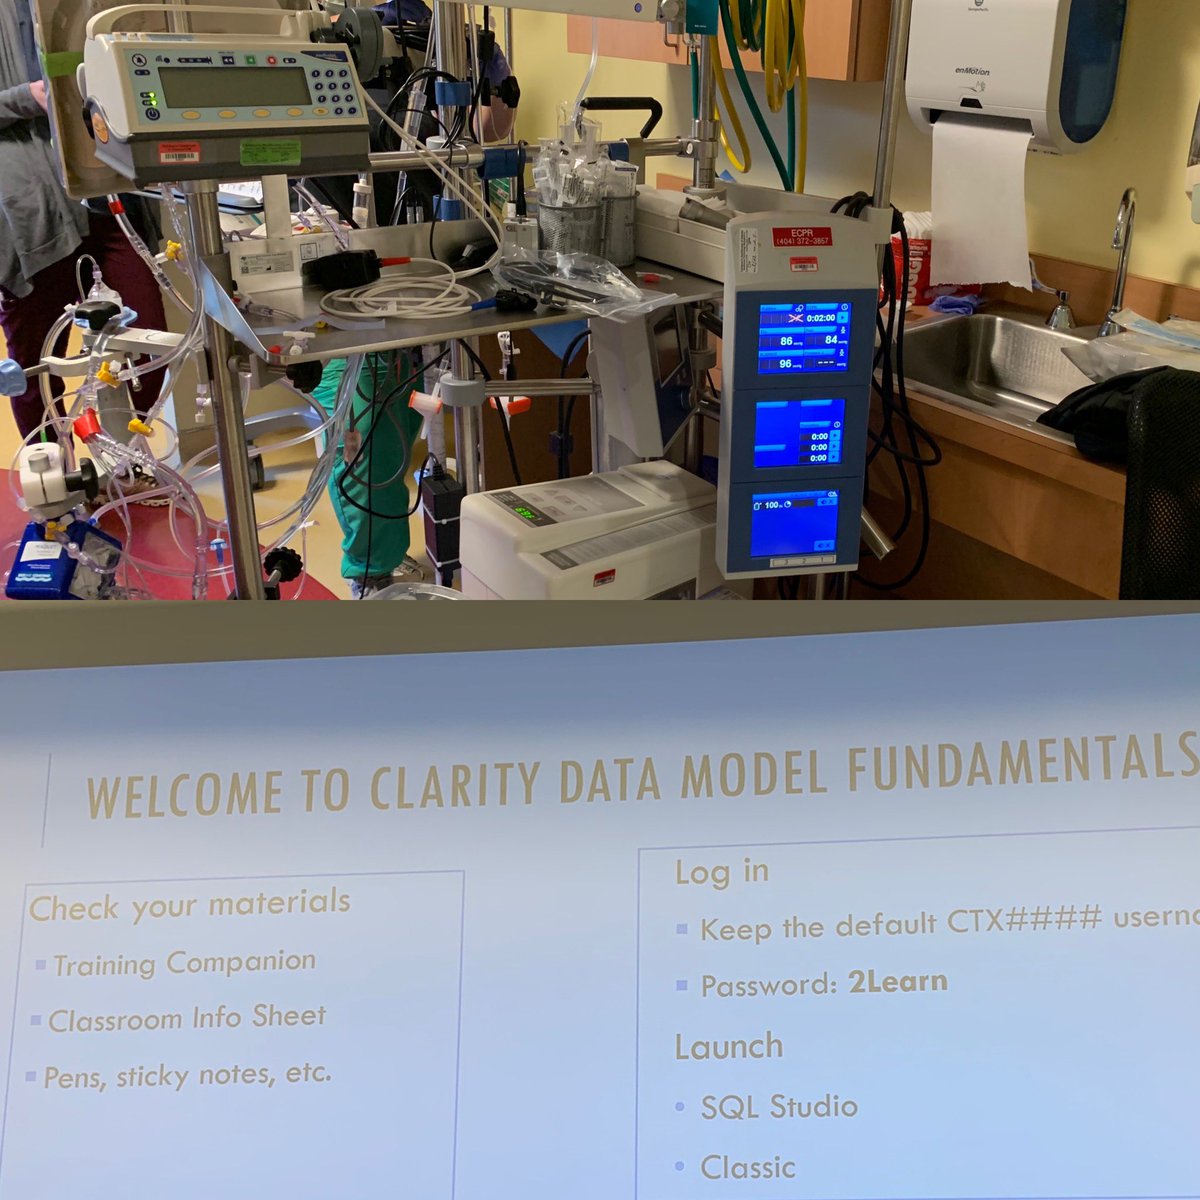 What does it mean to balance an informatics role while trying to keep you clinical skills? It means Sunday I was preventing a patient from going on #ecmo and Monday I’m learning about the #Epic Clarity Data Model. It’s a wild life but grateful for the opportunities!